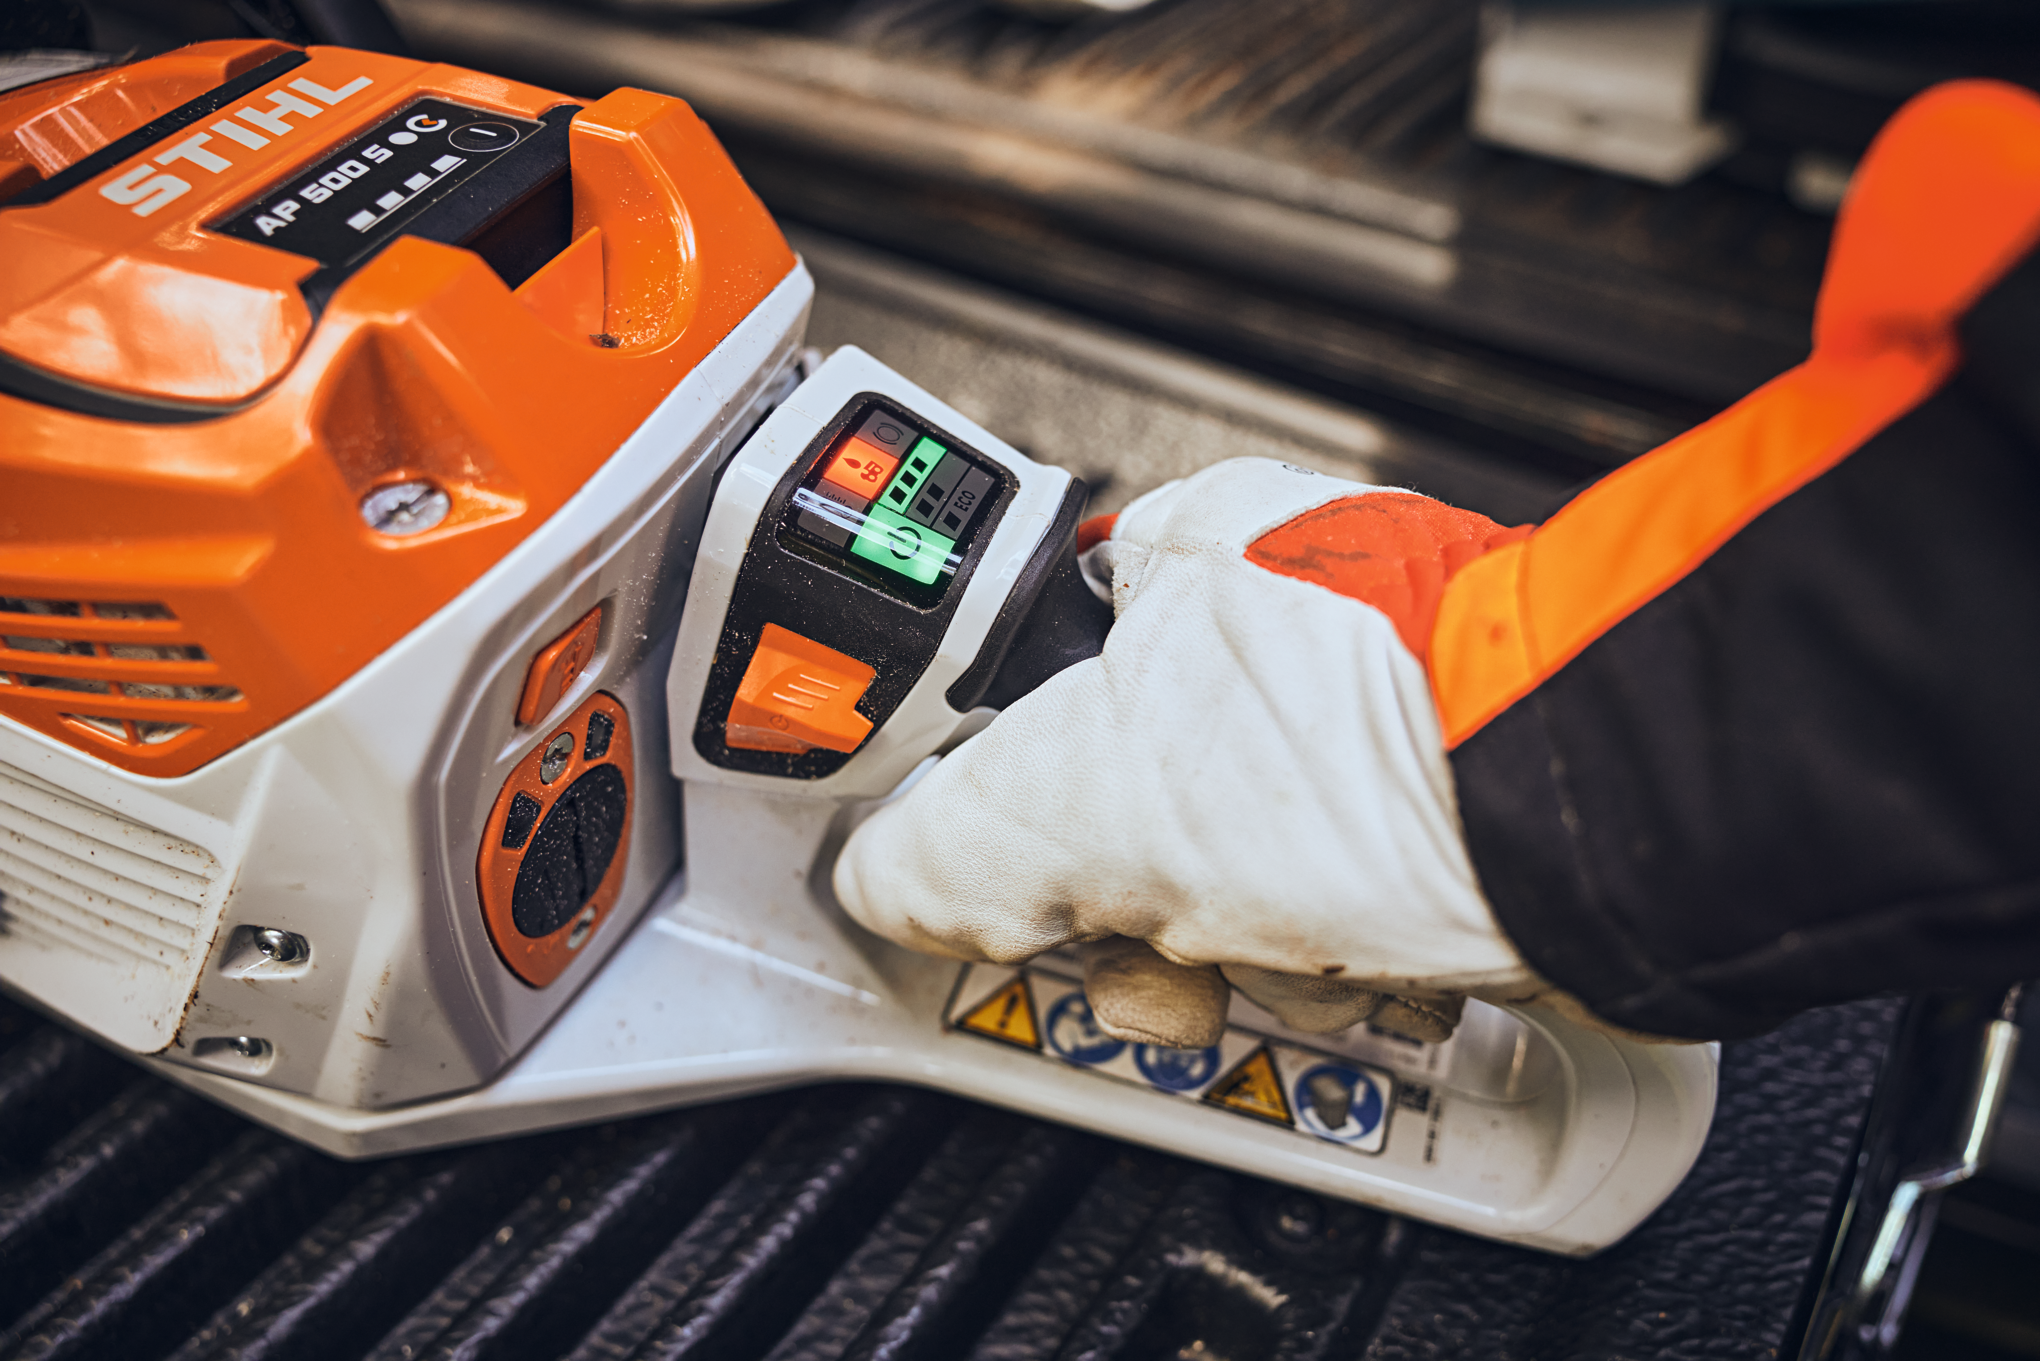 Free 1 year warranty extension with Stihl Smart Connector!